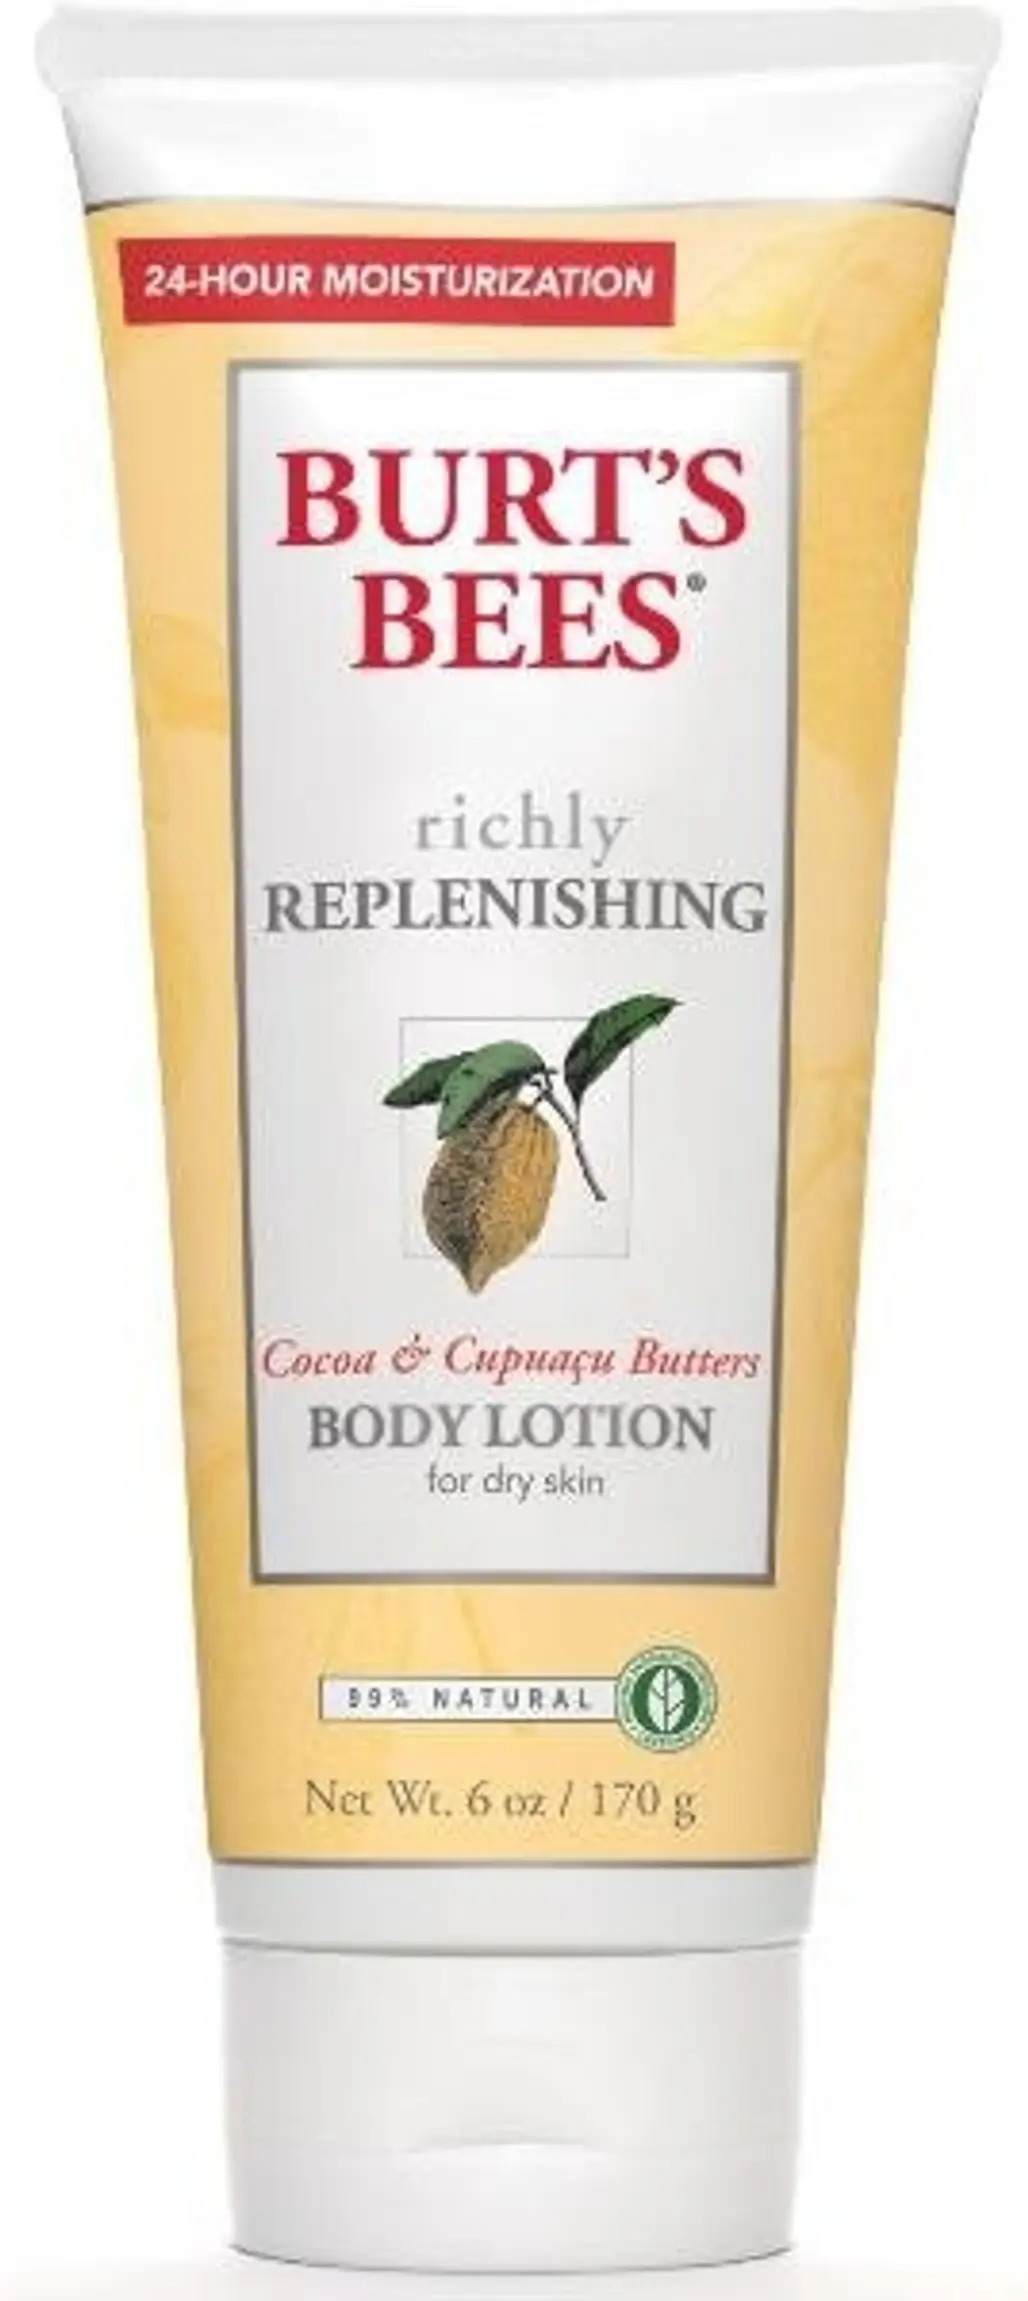 Richly Replenishing Cocoa & Cupuacu Butters Body Lotion